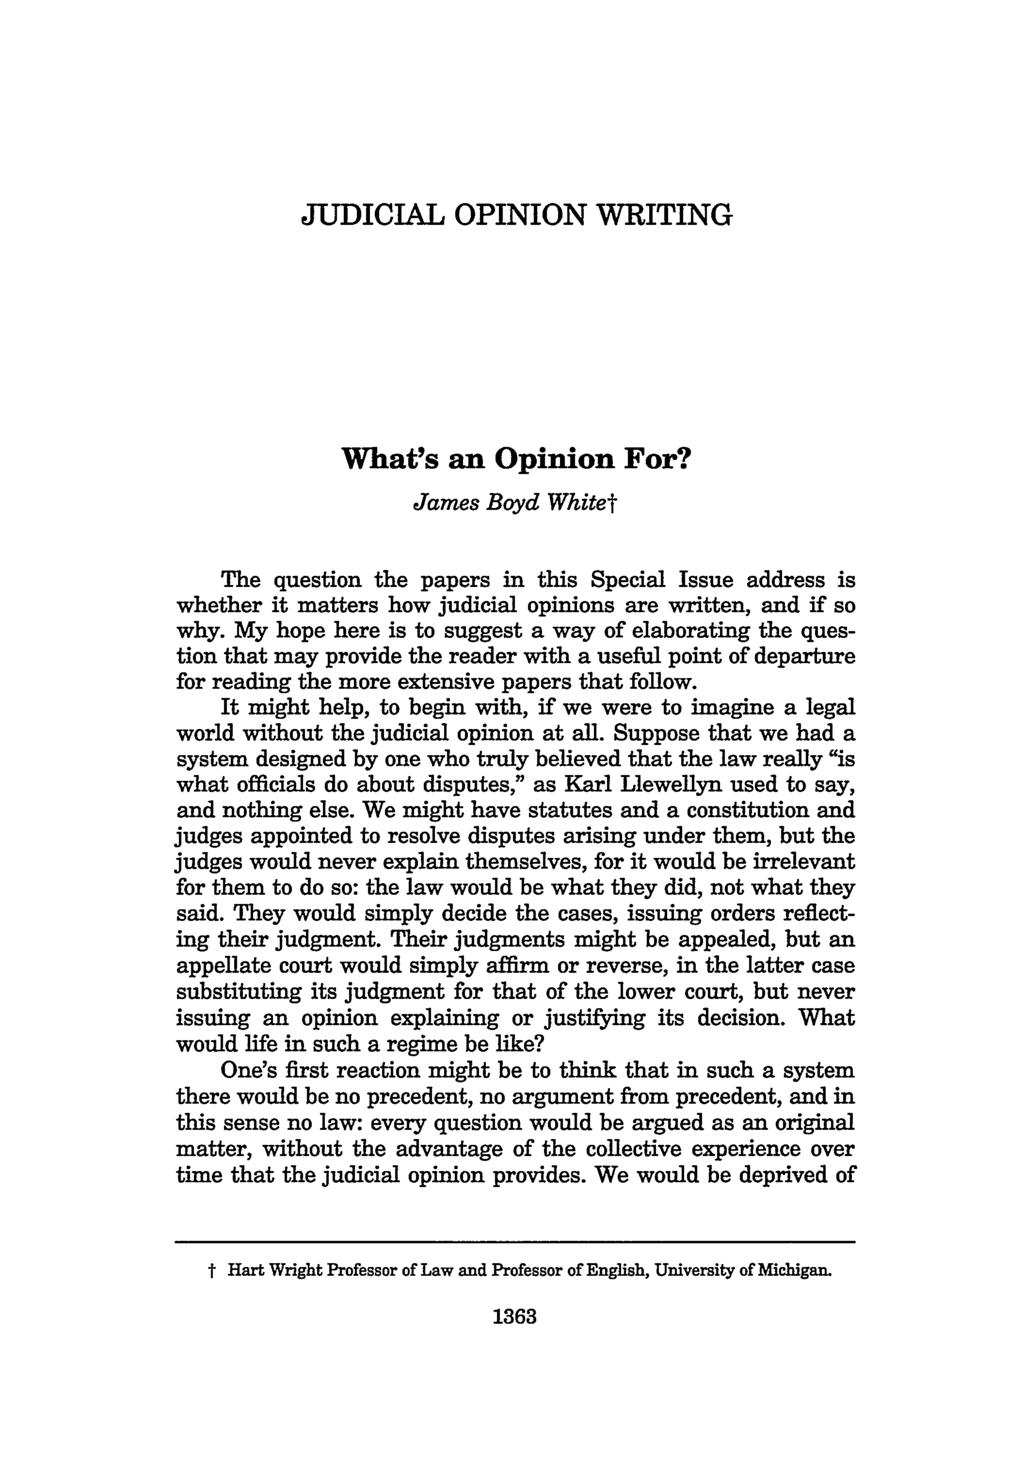 JUDICIAL OPINION WRITING What's an Opinion For? James Boyd Whitet The question the papers in this Special Issue address is whether it matters how judicial opinions are written, and if so why.